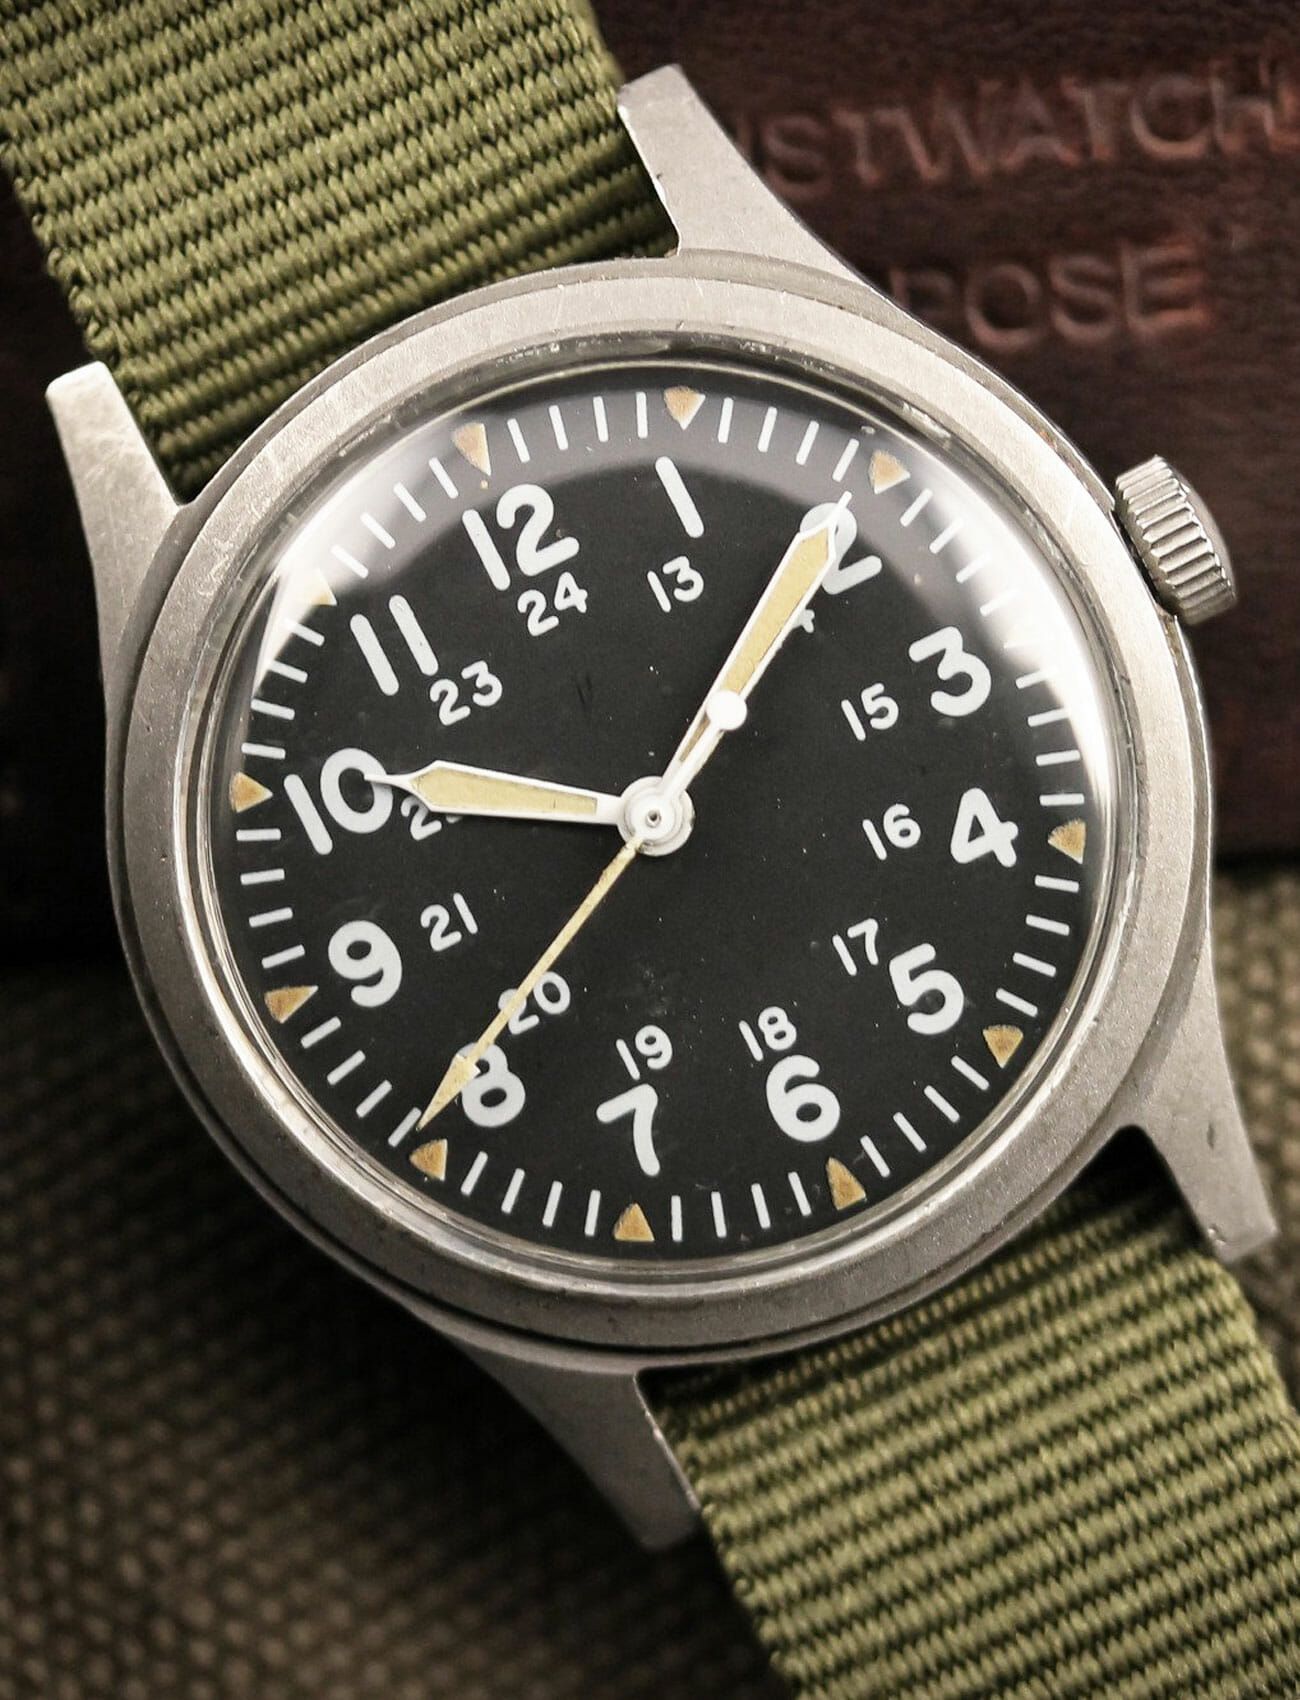 21 Of The Best Military Watches And Their Histories | lupon.gov.ph